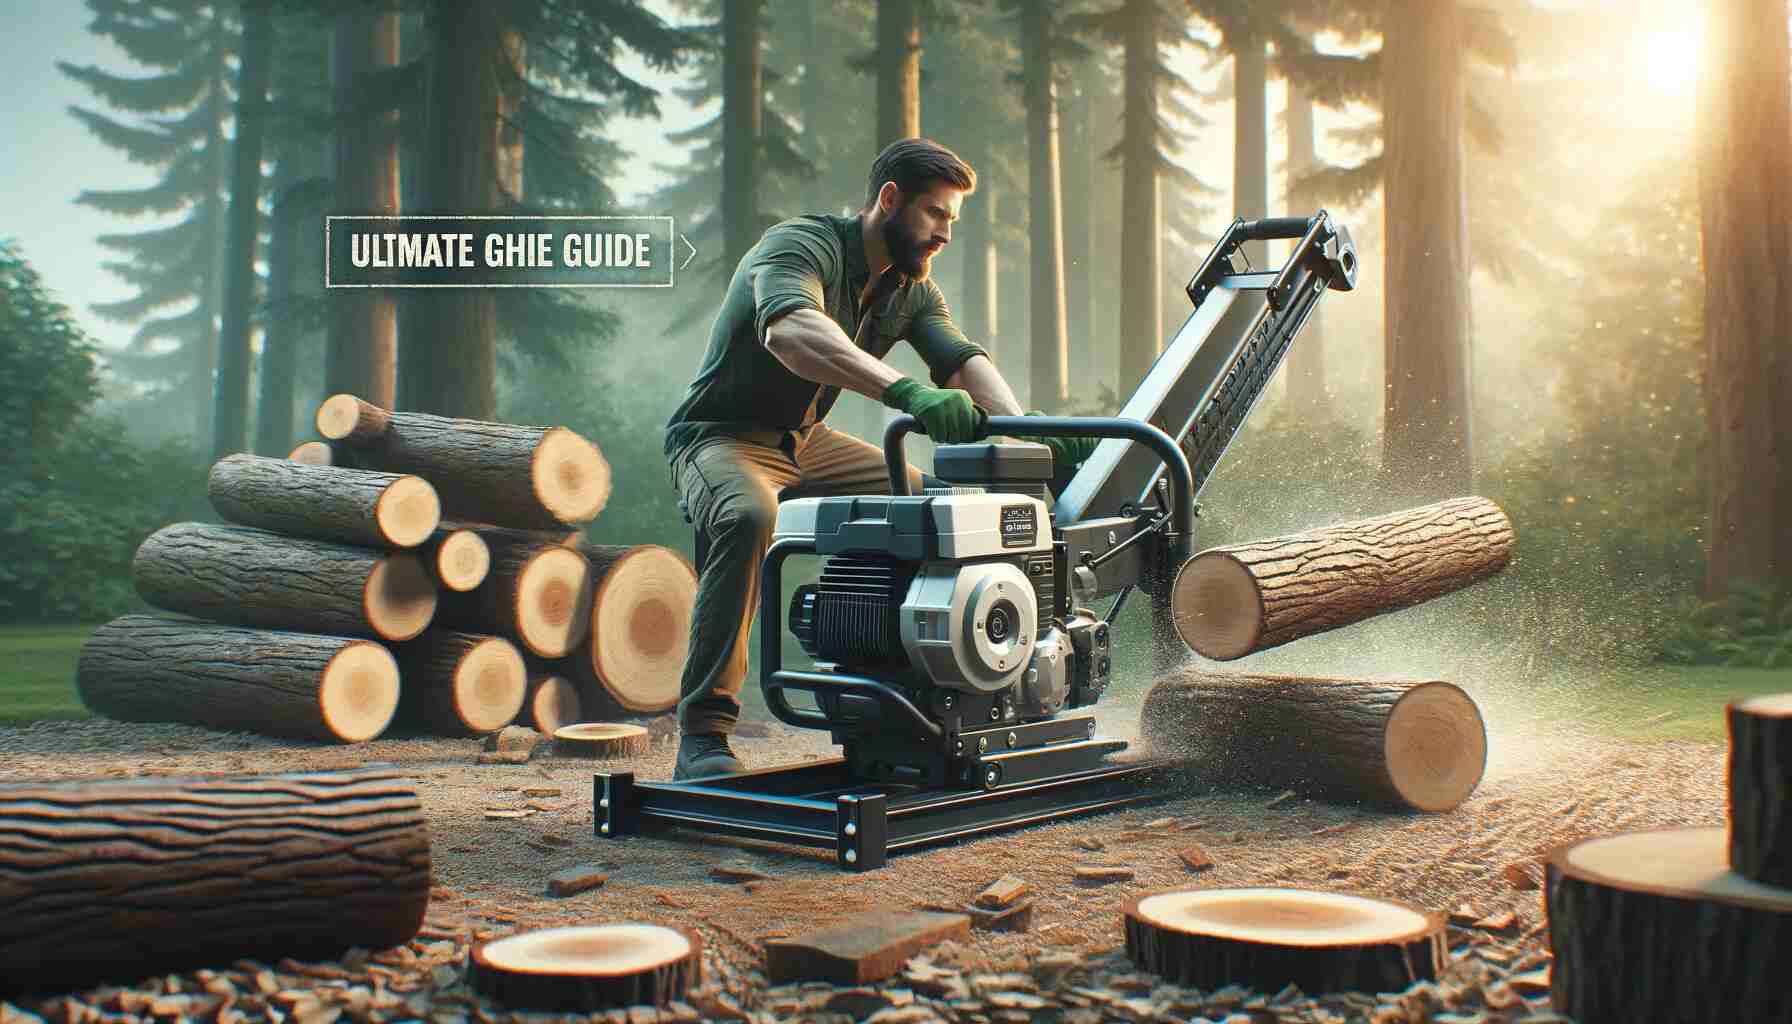 Here is the featured image for "The Ultimate Guide to Choosing the Best Hydraulic Log Splitter." The image showcases a hydraulic log splitter in action within an appropriate outdoor setting, with the title of the guide prominently displayed.